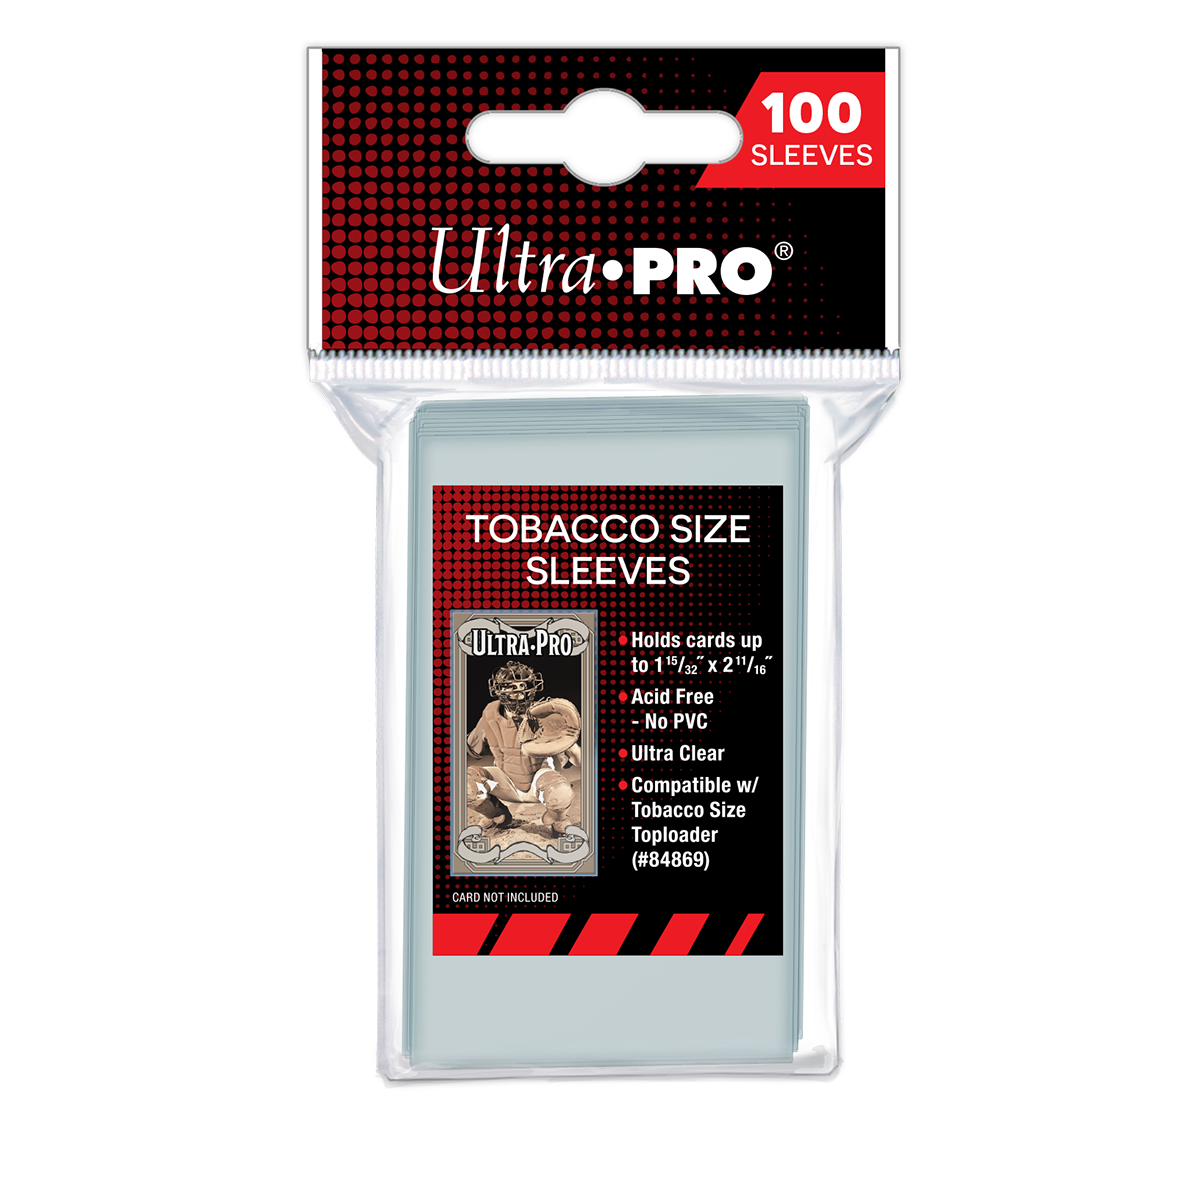 100 Ultra Pro 3 X 5 Postcard Soft Sleeves - (Holds up to 3-11/16 X  5-3/4)